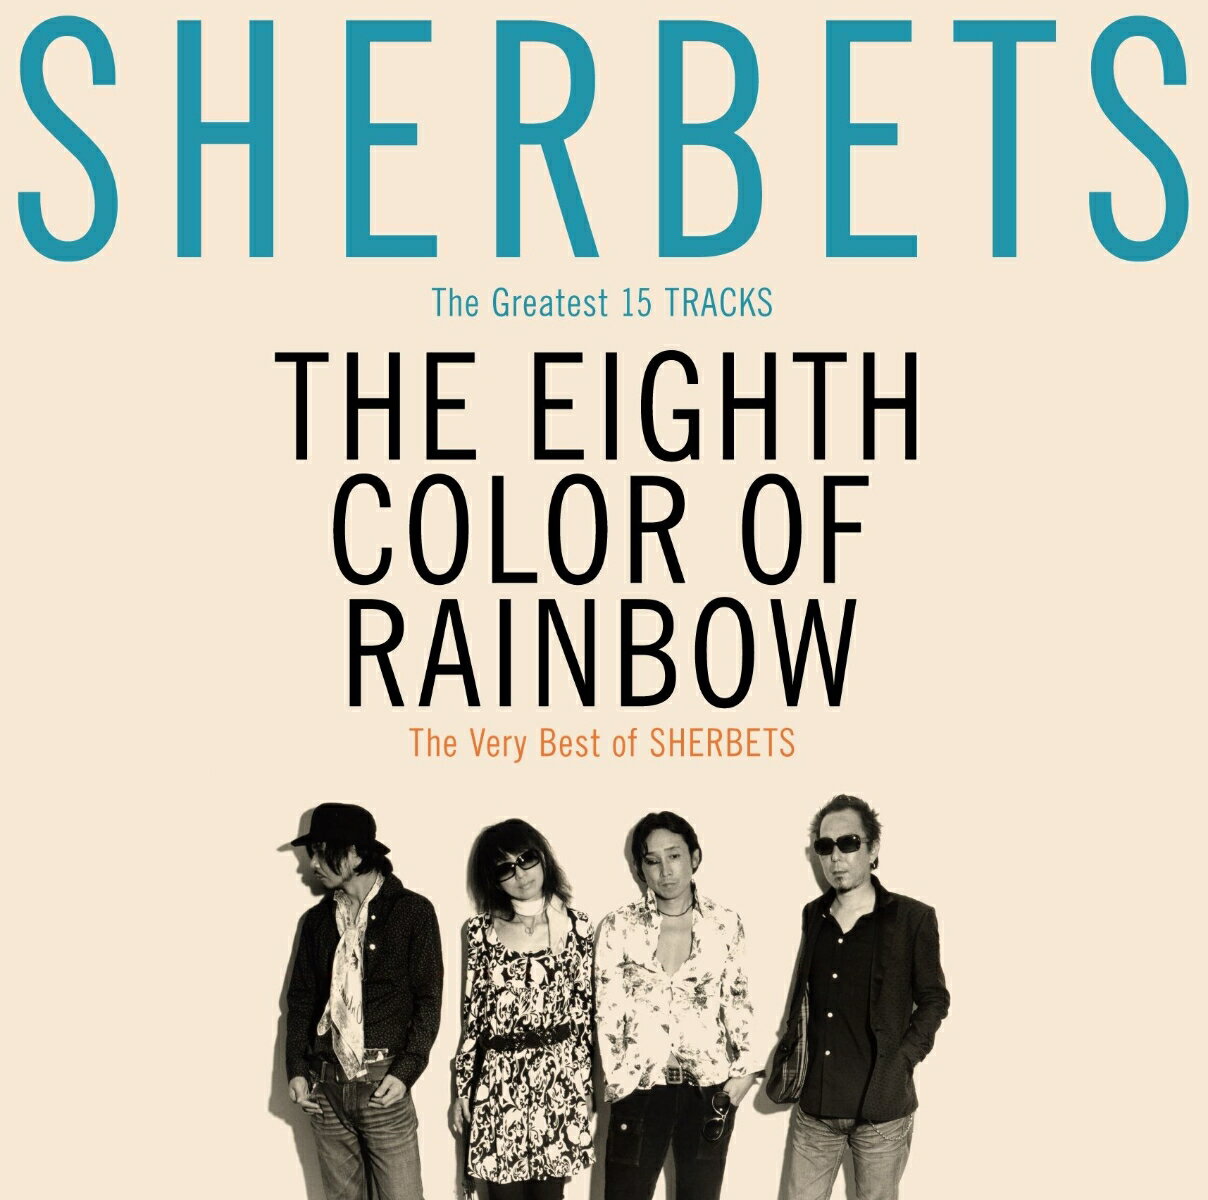 The Very Best of SHERBETS 「8色目の虹」